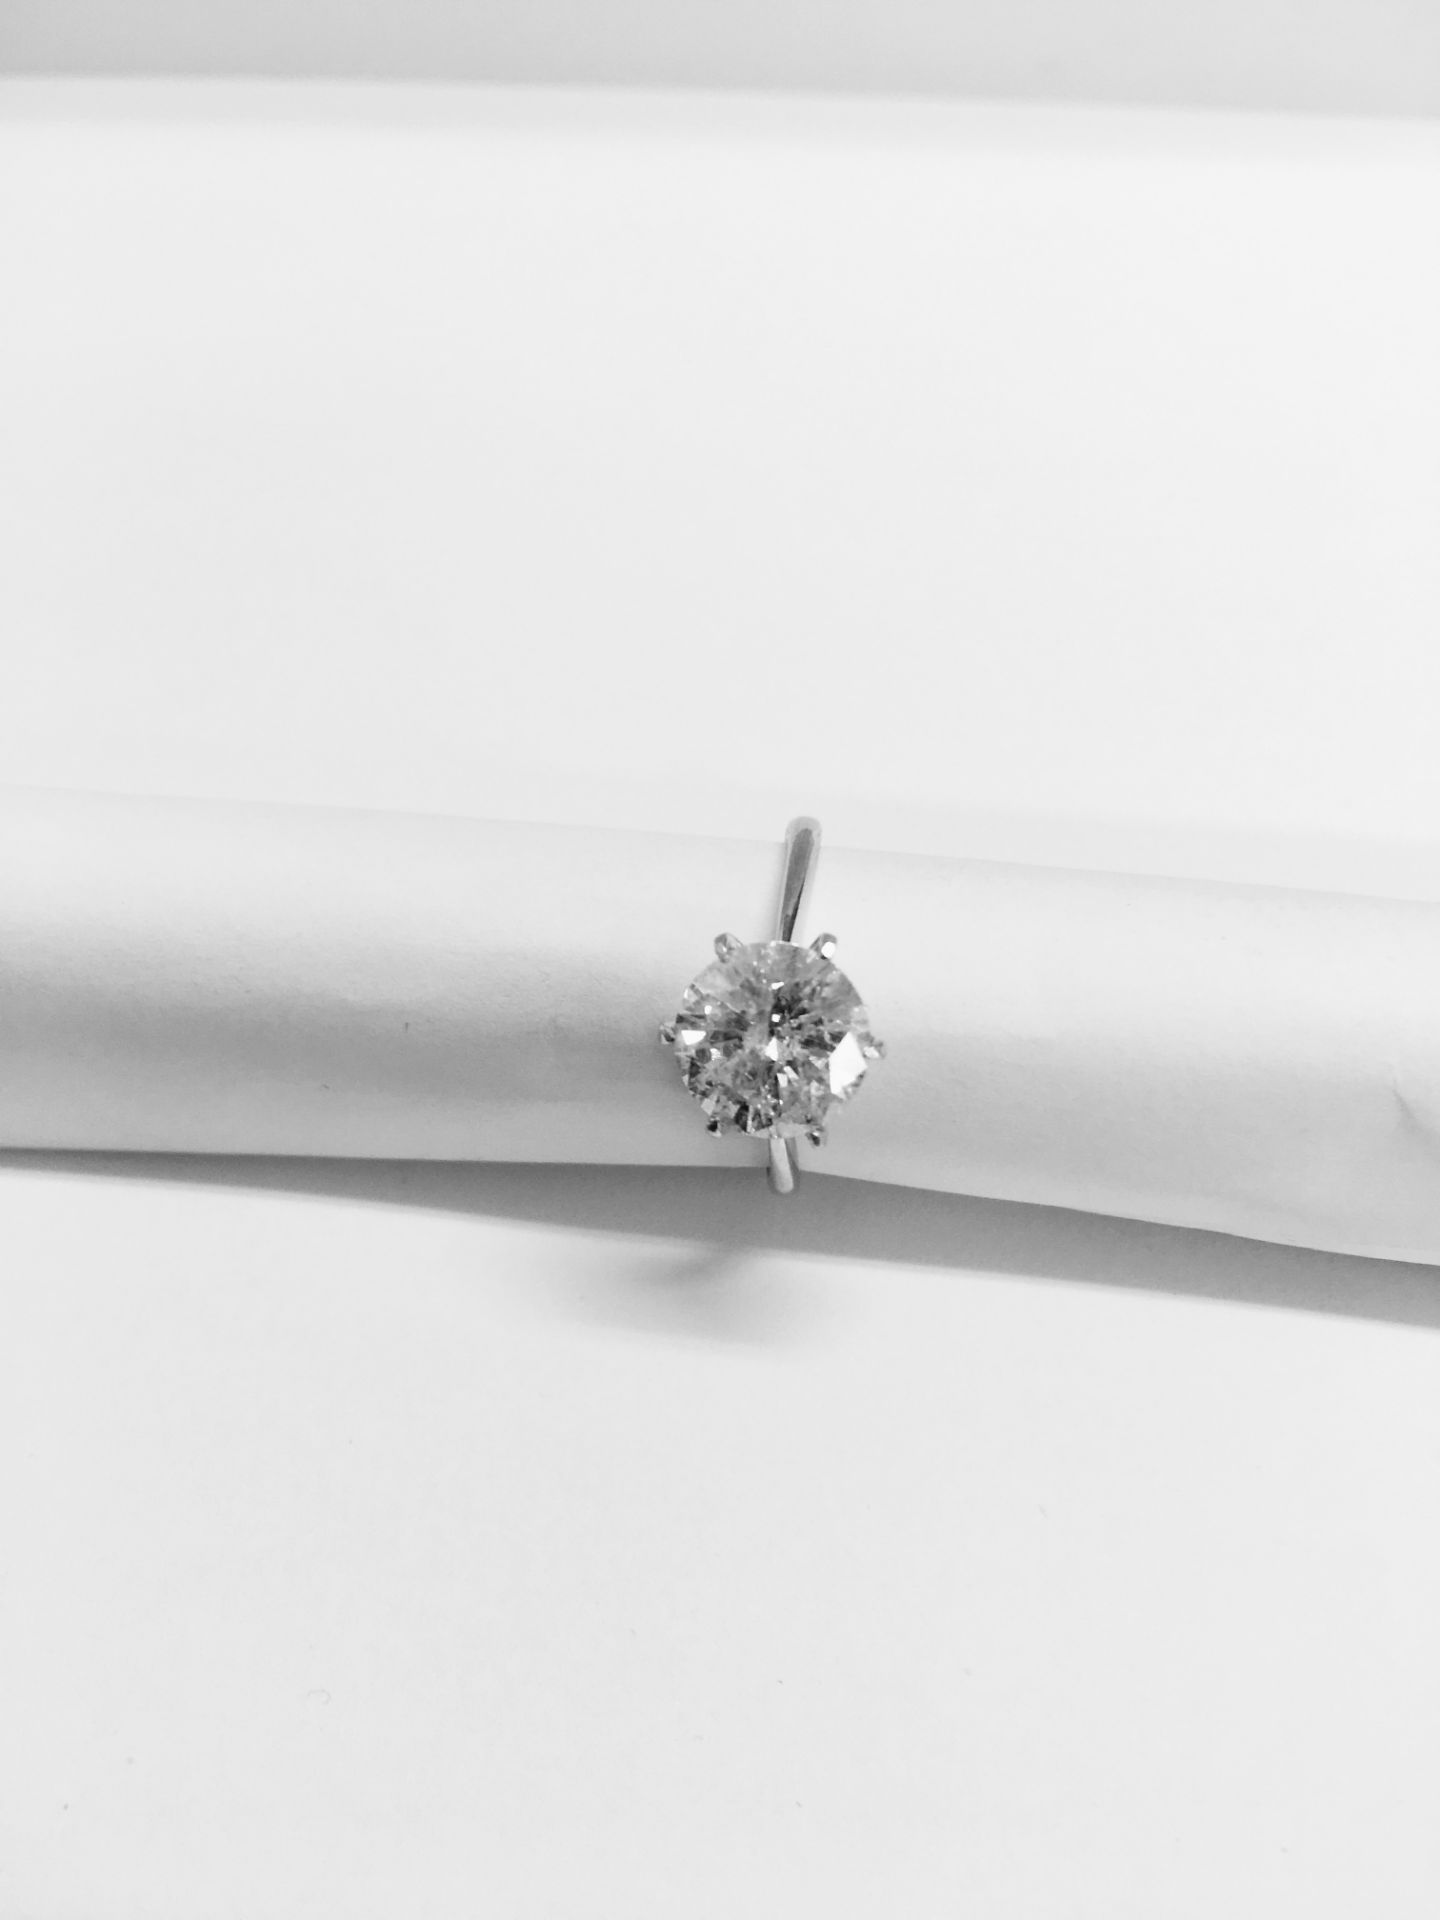 4.38ct diamond solitaire ring,h colour i1 quality (enhanced by laser drilling) diamond,5gms platinum - Image 4 of 8